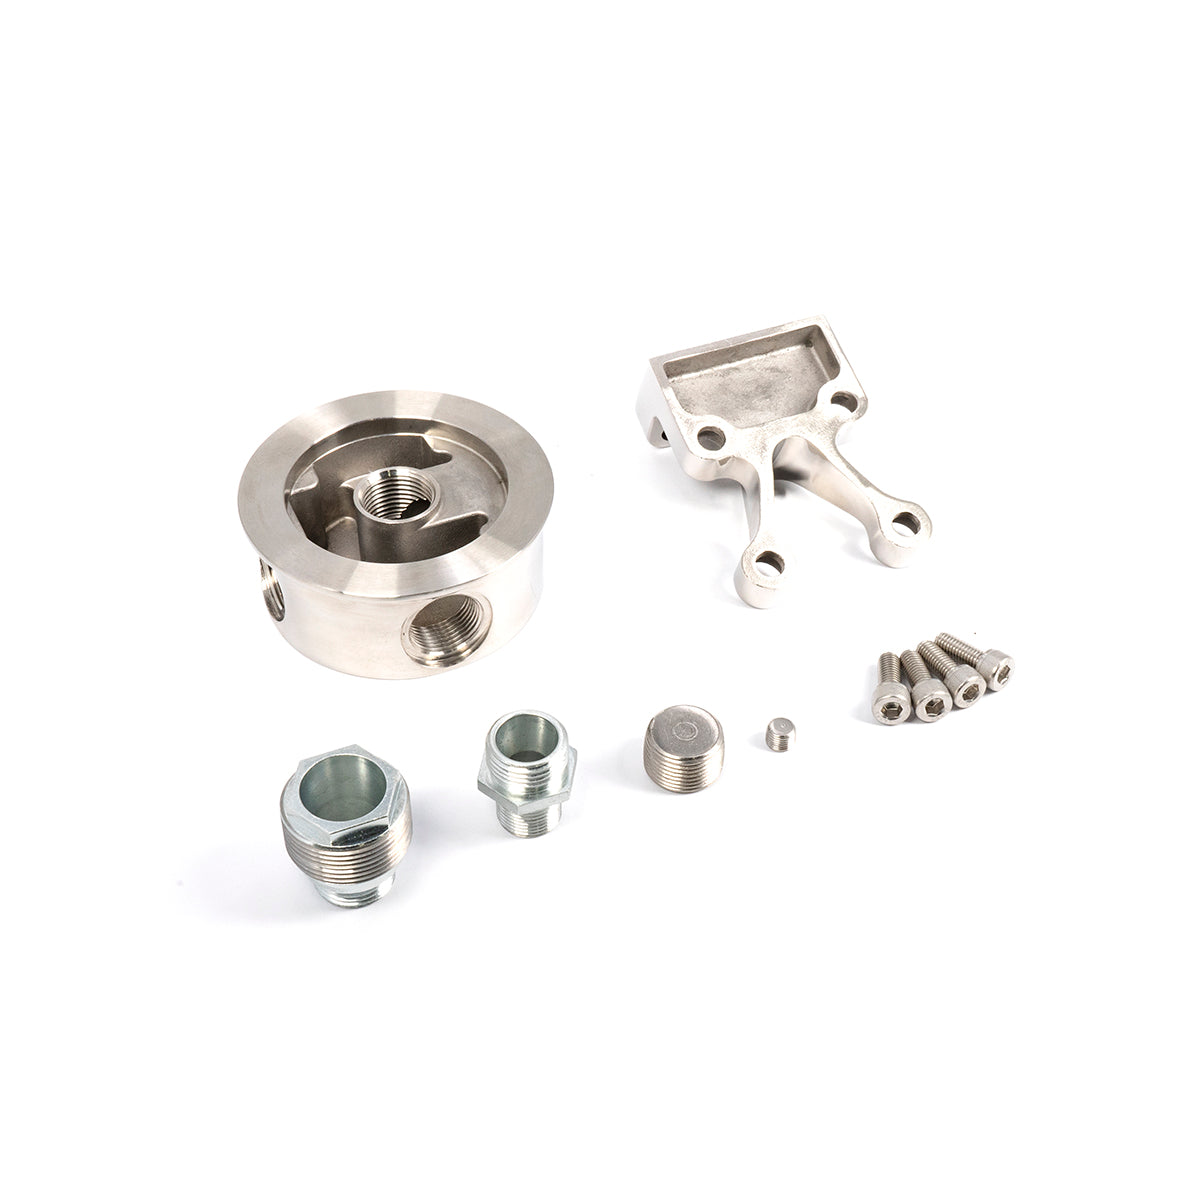 Remote Oil Filter Mount Kit - Polished 304 Stainless Steel ppepower